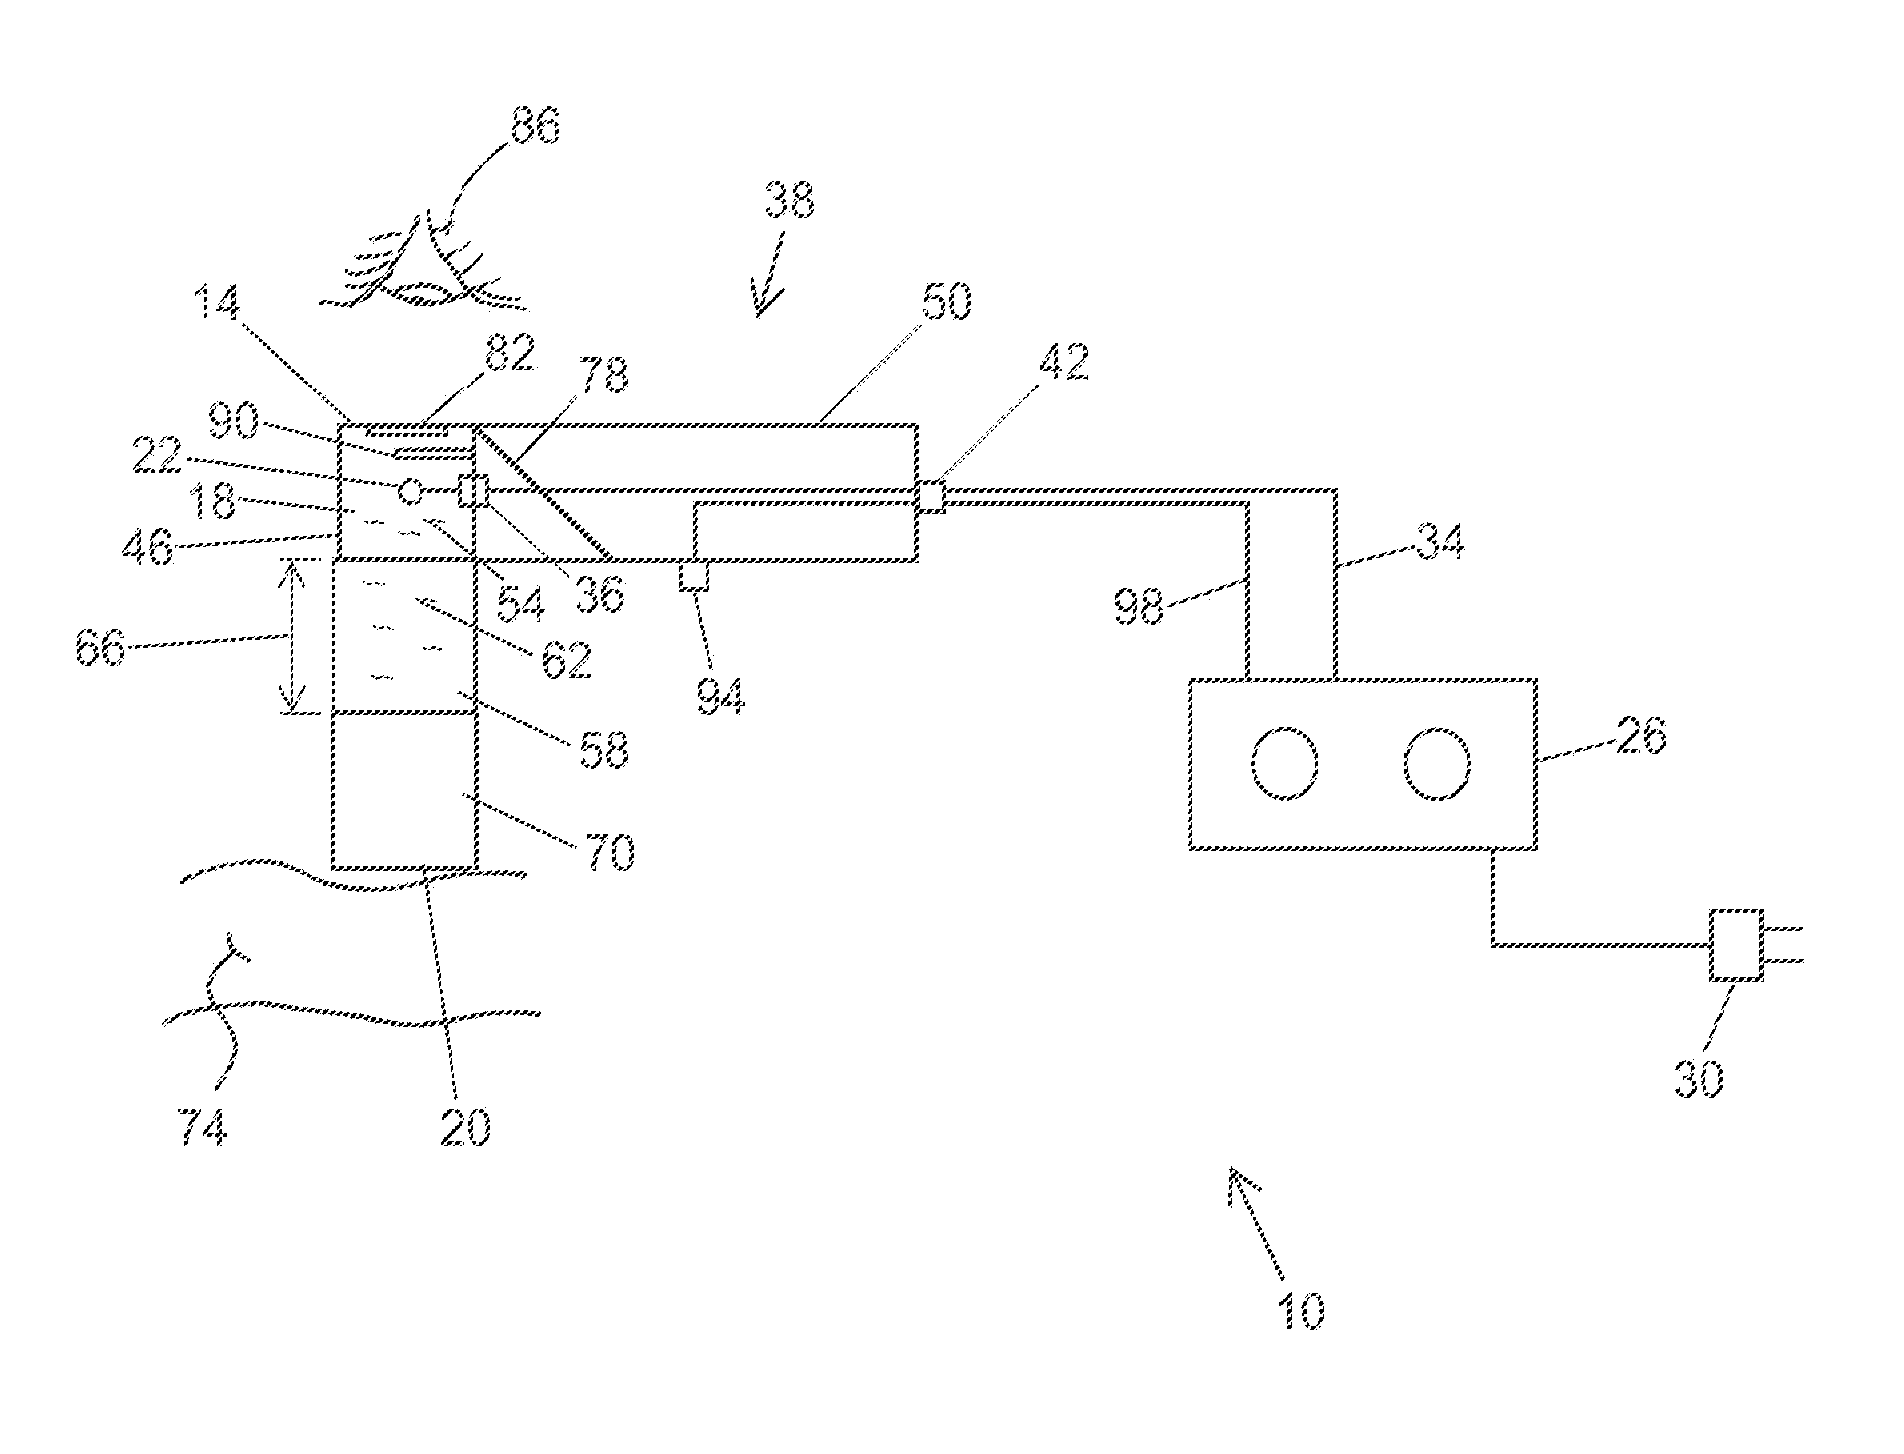 Rapid pulse electrohydraulic (EH) shockwave generator apparatus and methods for medical and cosmetic treatments